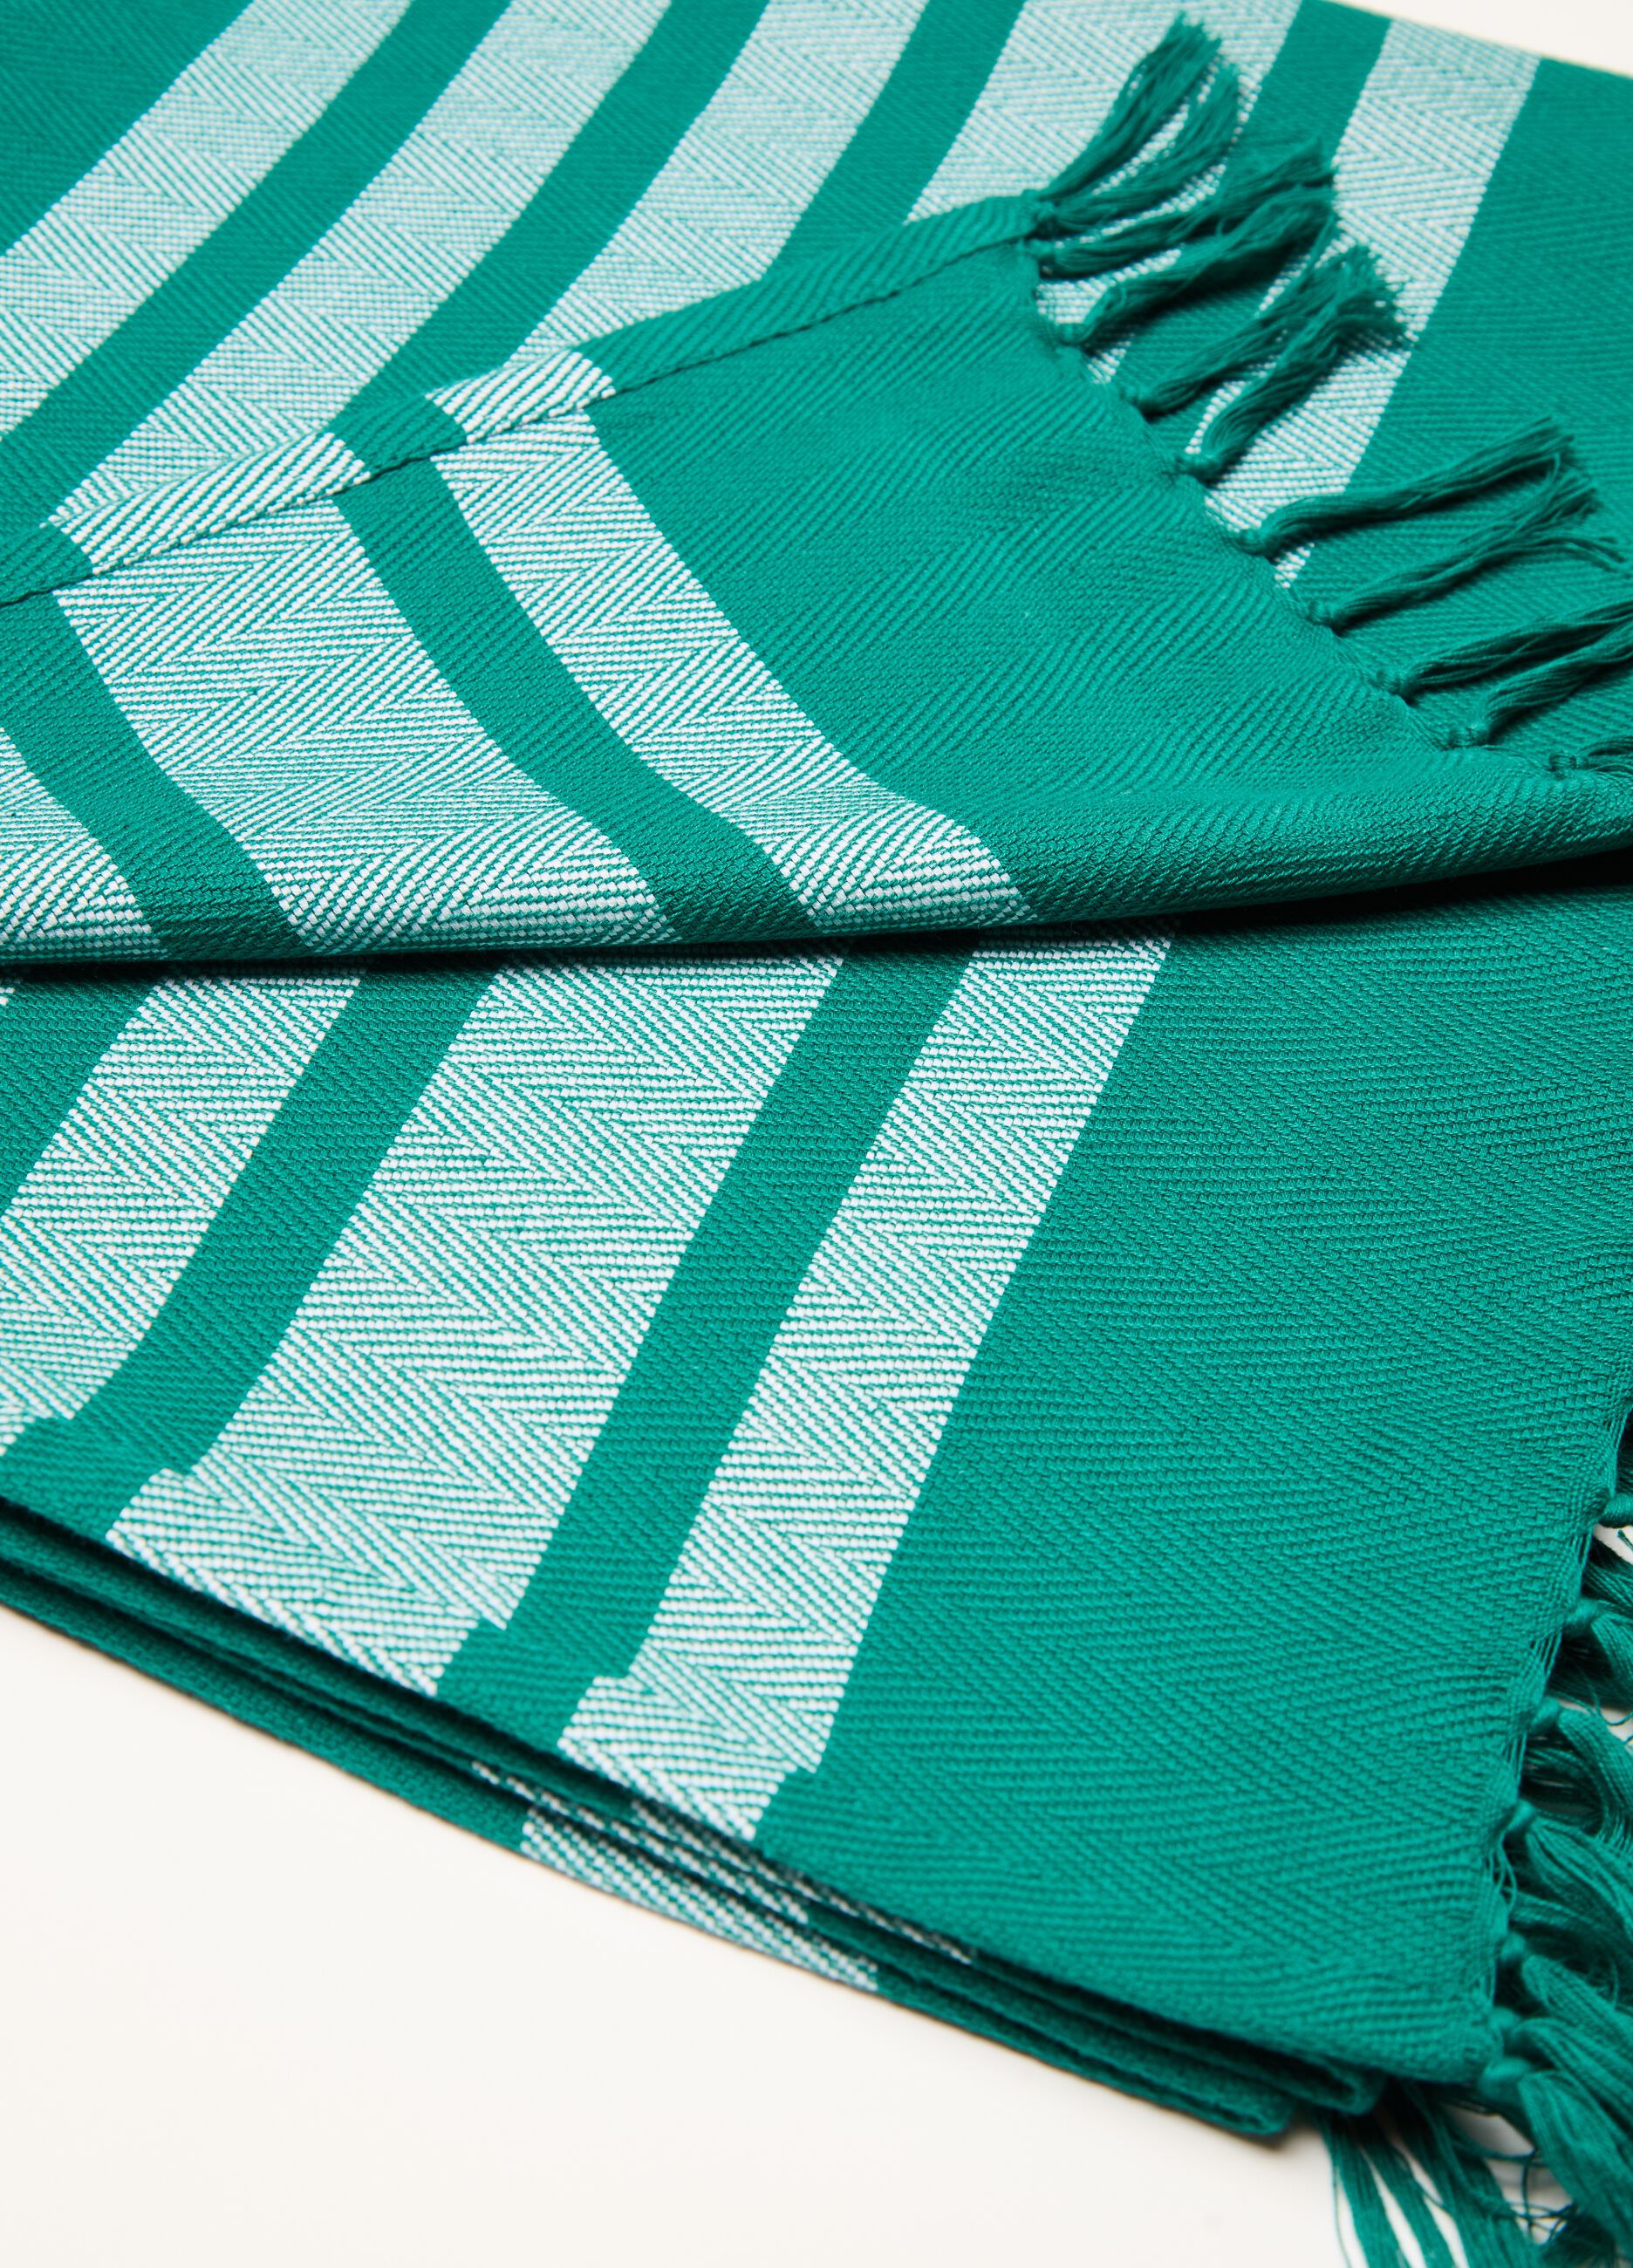 Beach towel with striped design